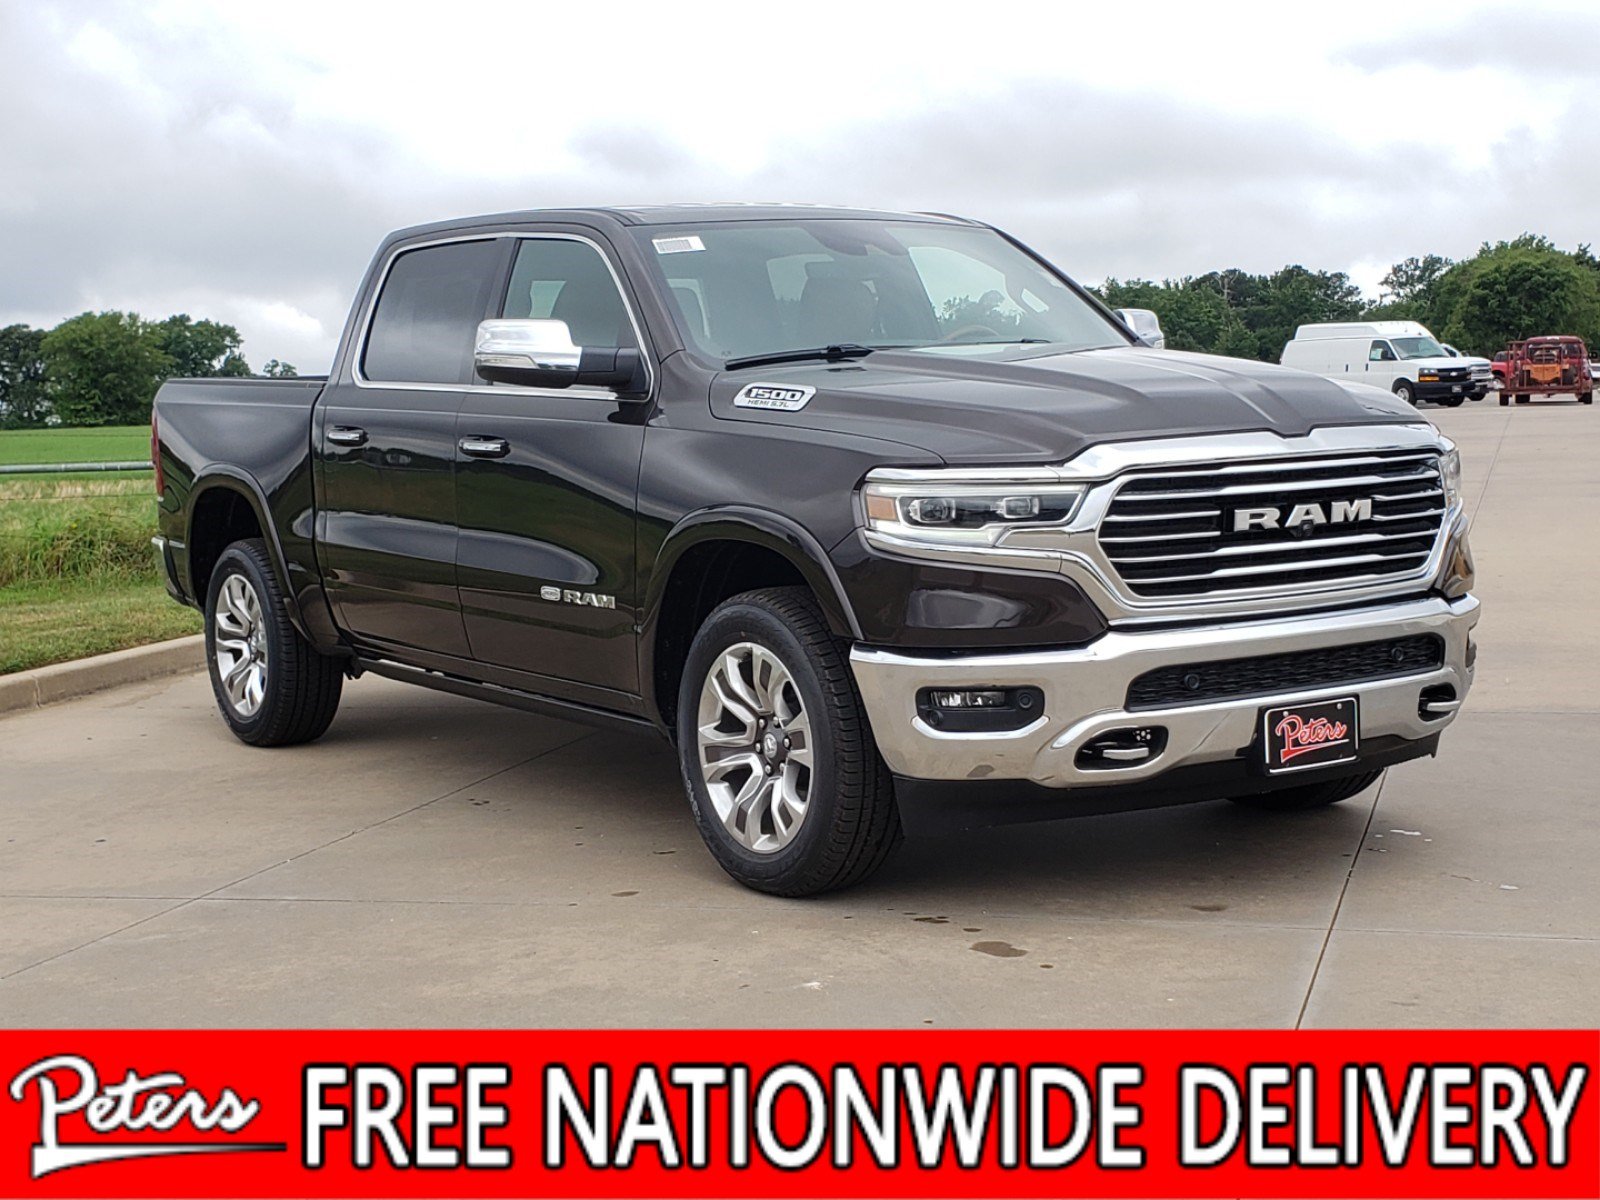 New 2019 Ram 1500 Longhorn With 4wd